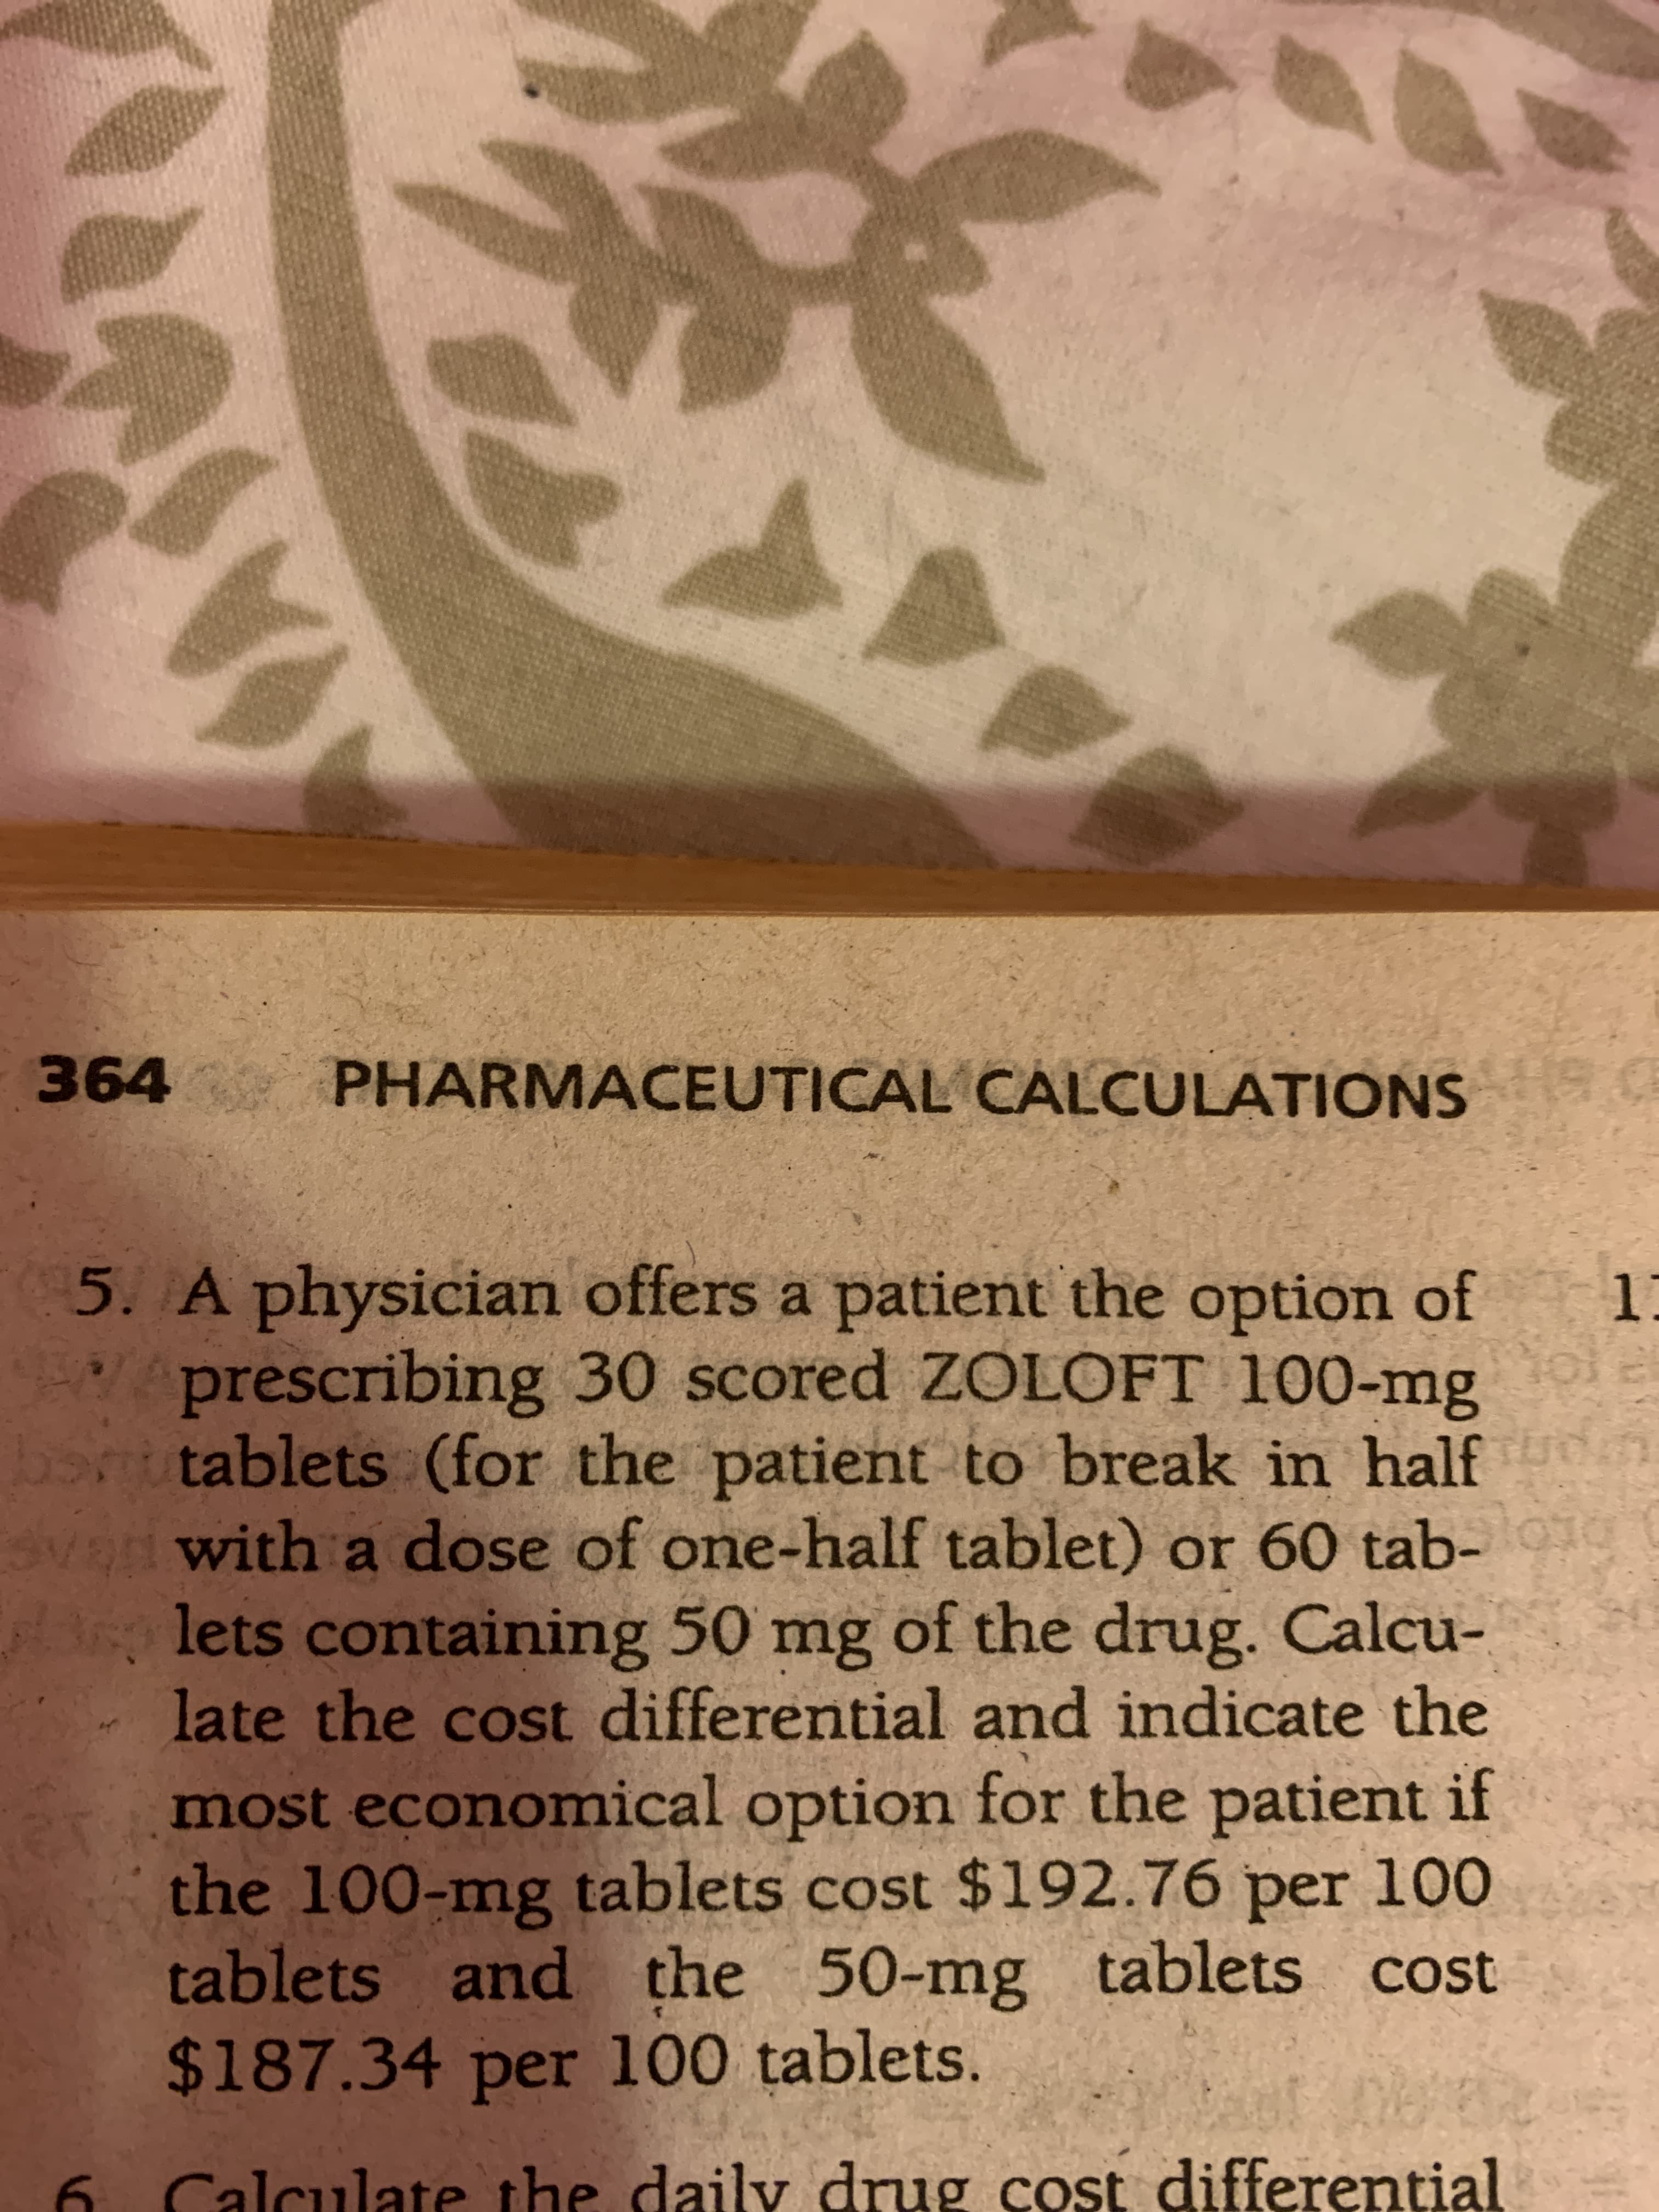 PHARMACEUTICAL CALCULATIONS
5. A physician offers a patient the option of
prescribing 30 scored ZOLOFT 100-mg
tablets (for the patient to break in half
with a dose of one-half tablet) or 60 tab-
lets containing 50 mg of the drug. Calcu-
late the cost differential and indicate the
most economical option for the patient if
the 100-mg tablets cost $192.76 per 100
tablets and the 50-mg tablets cost
$187.34 per 100 tablets.
6 Calculate the daily drug cost differential
